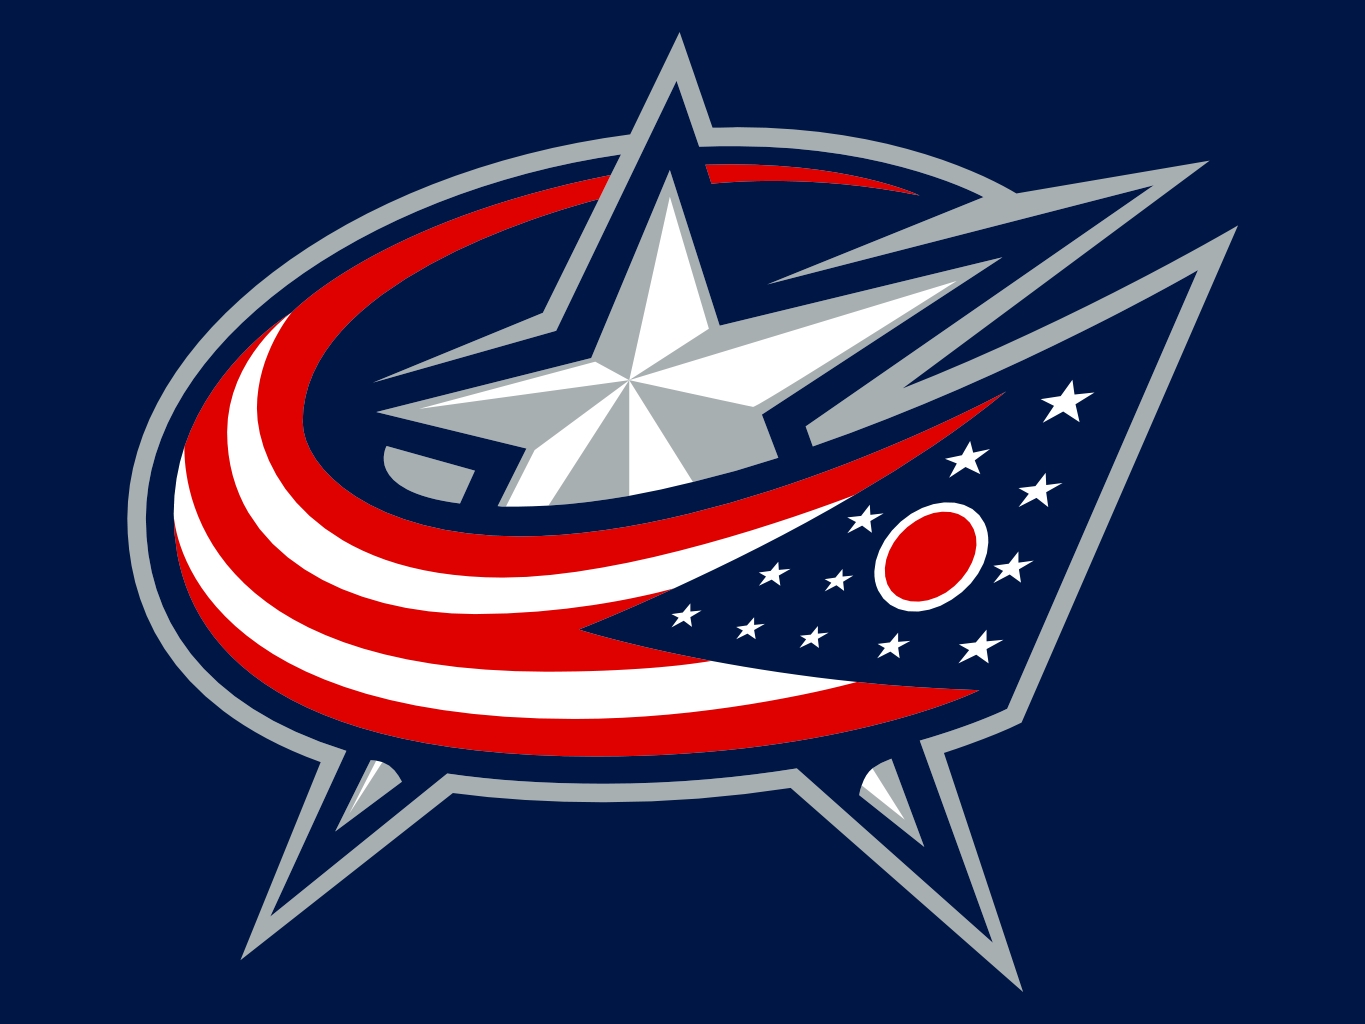 Blue Jackets Archives - NEO Sports Insiders